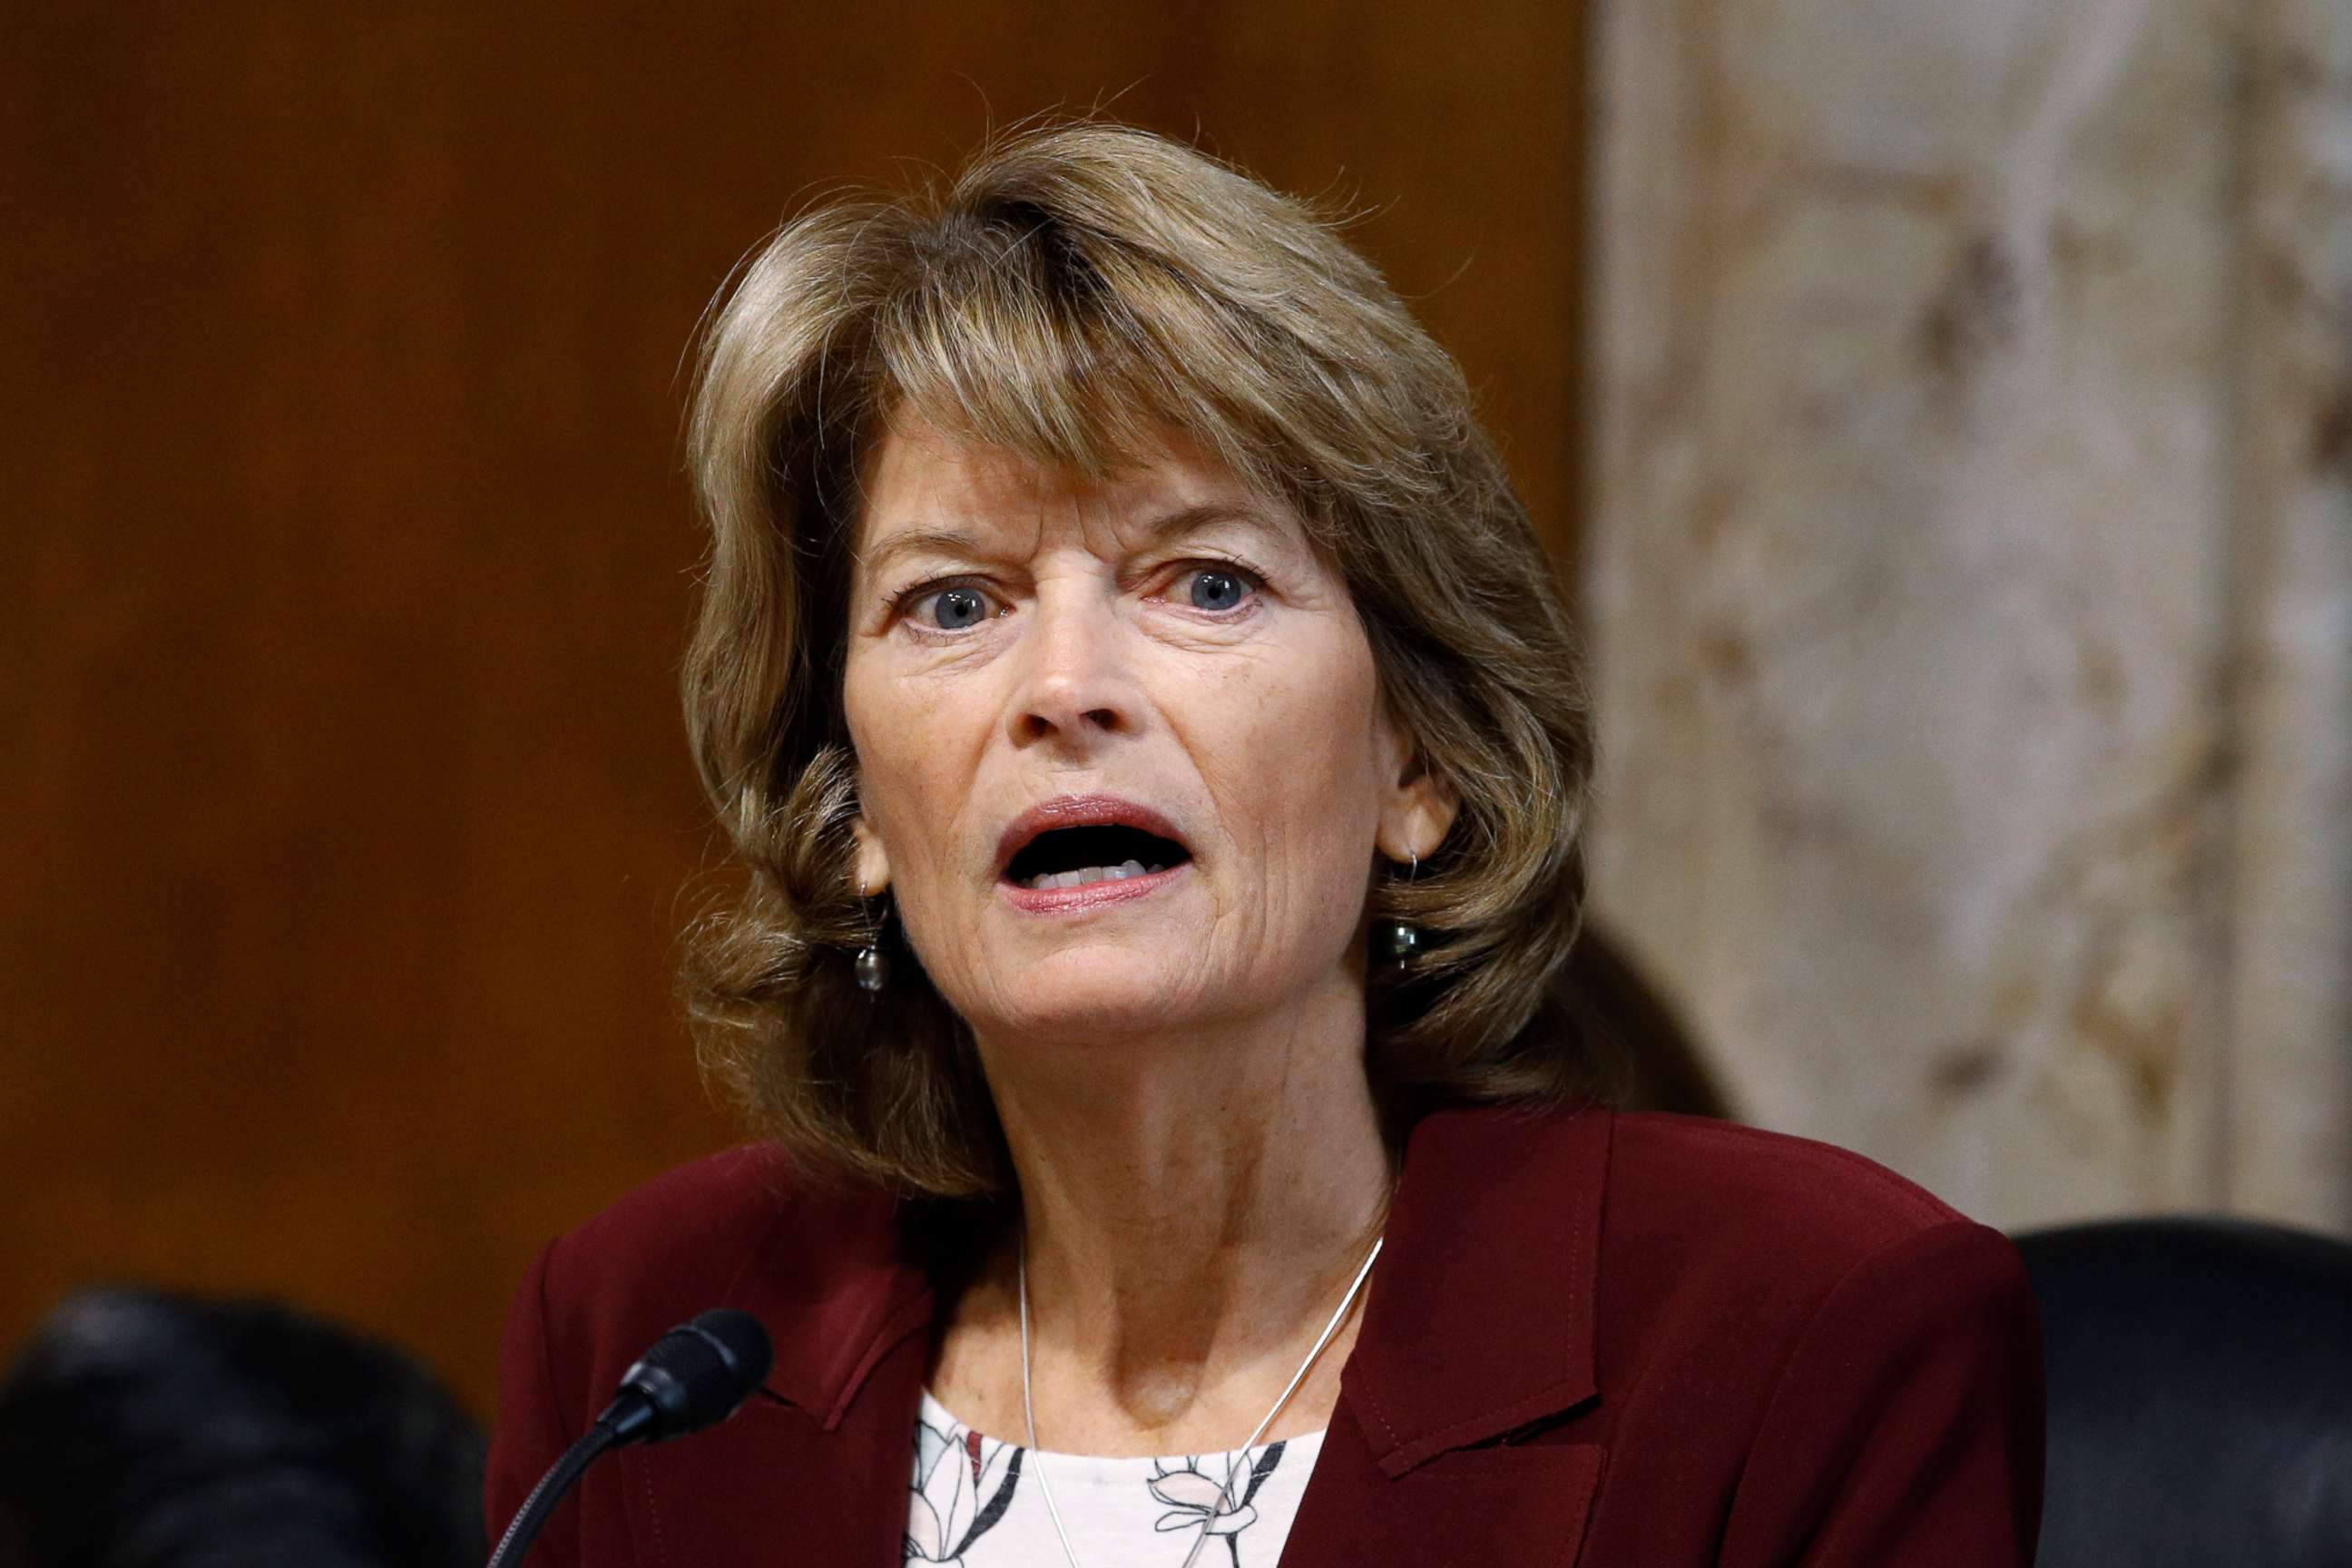 PHOTO: Sen. Lisa Murkowski, chair of the Senate Energy and Natural Resources Committee, speaks during a hearing on the impact of wildfires on electric grid reliability on Capitol Hill in Washington, Dec. 19, 2019.